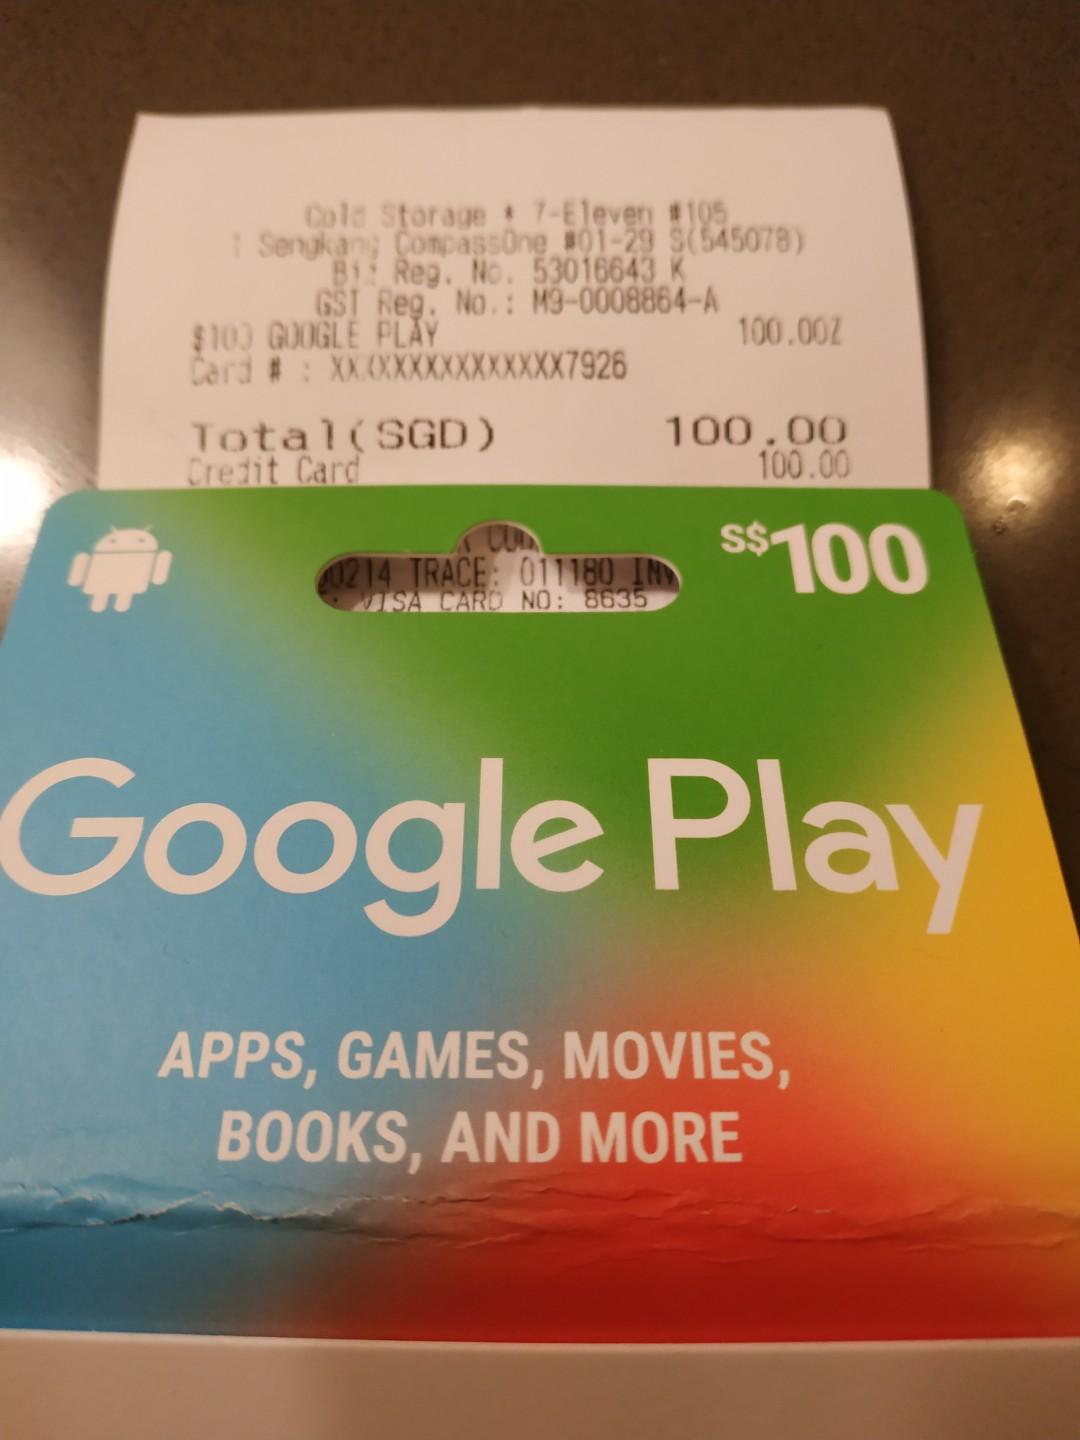 Google Play Card For Android Devices Tickets Vouchers Vouchers On Carousell